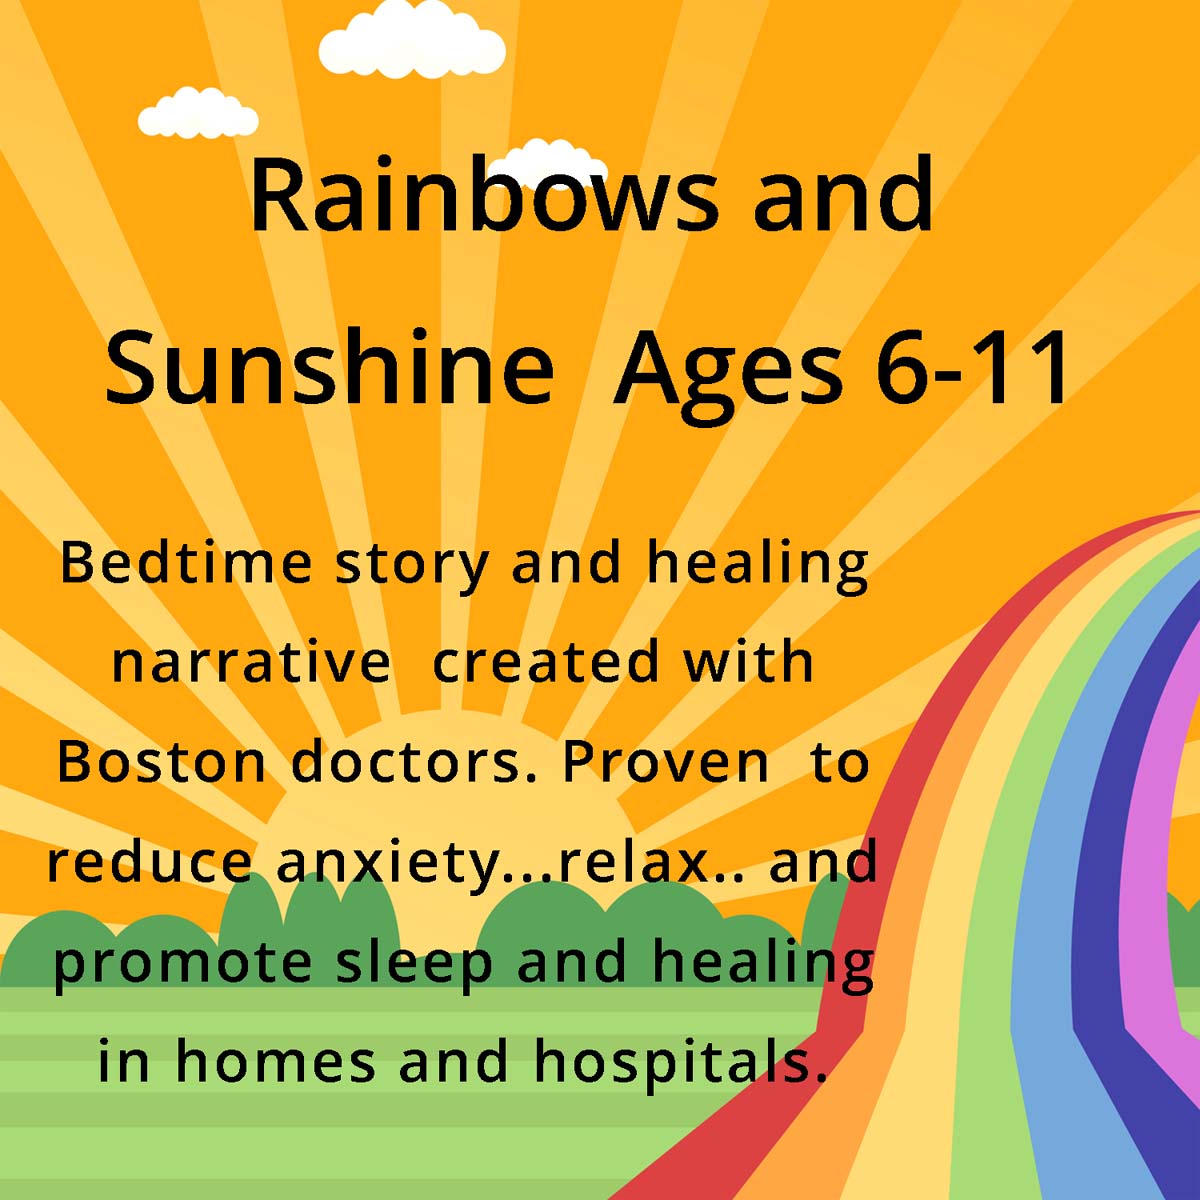 Rainbows and Sunshine guided meditations for kids